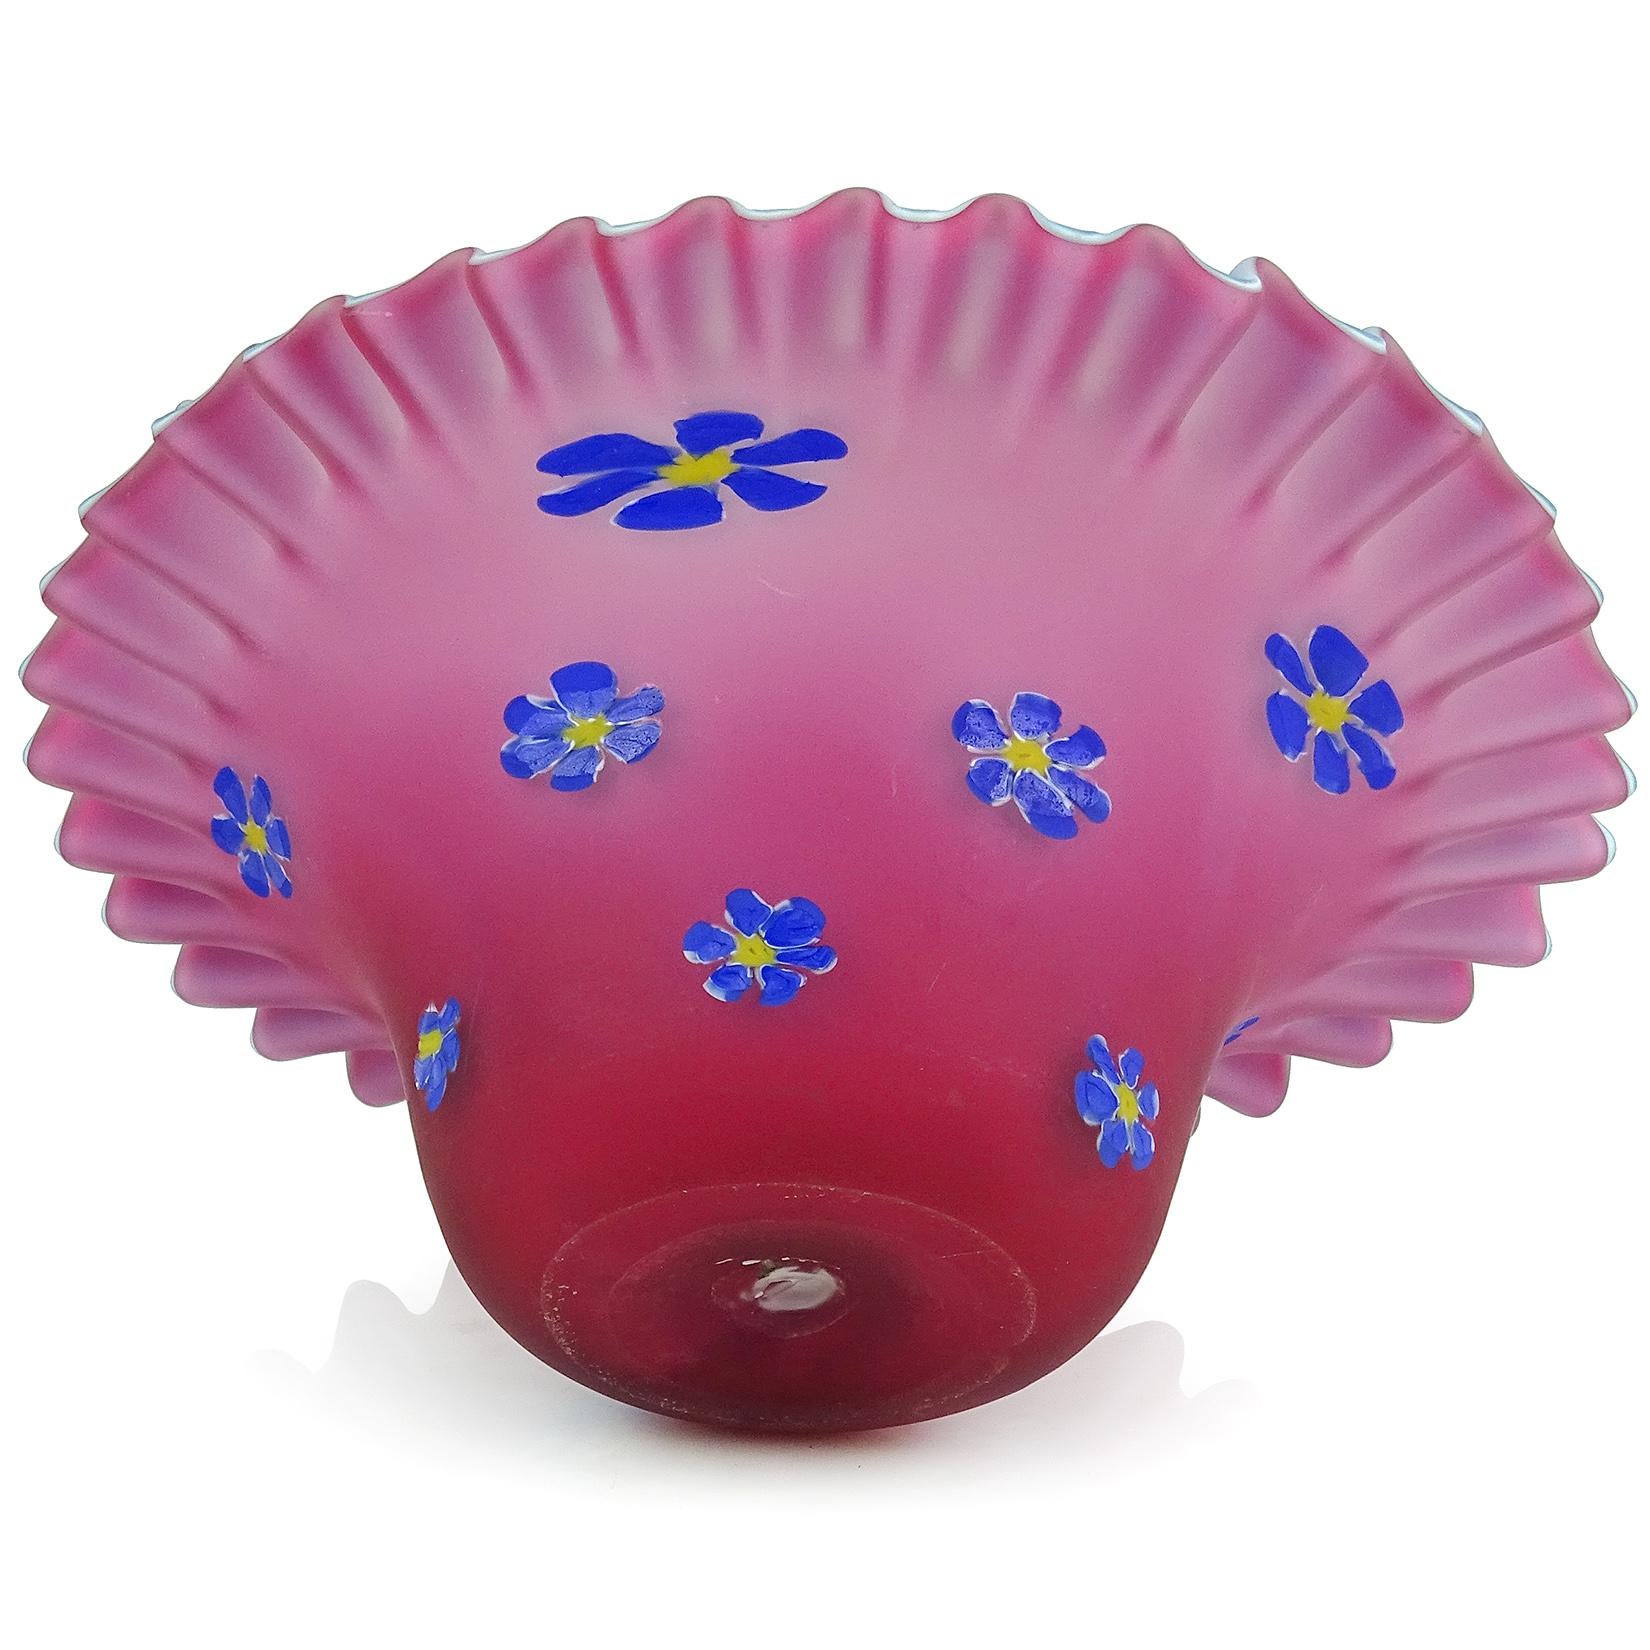 Beautiful vintage Murano hand blown dark red - pink and inside light blue satin surface Italian art glass bowl. Documented to the Fratelli Toso company. The bowl has blue millefiori flowers over the outside, and a crimped edge. It is soft to the